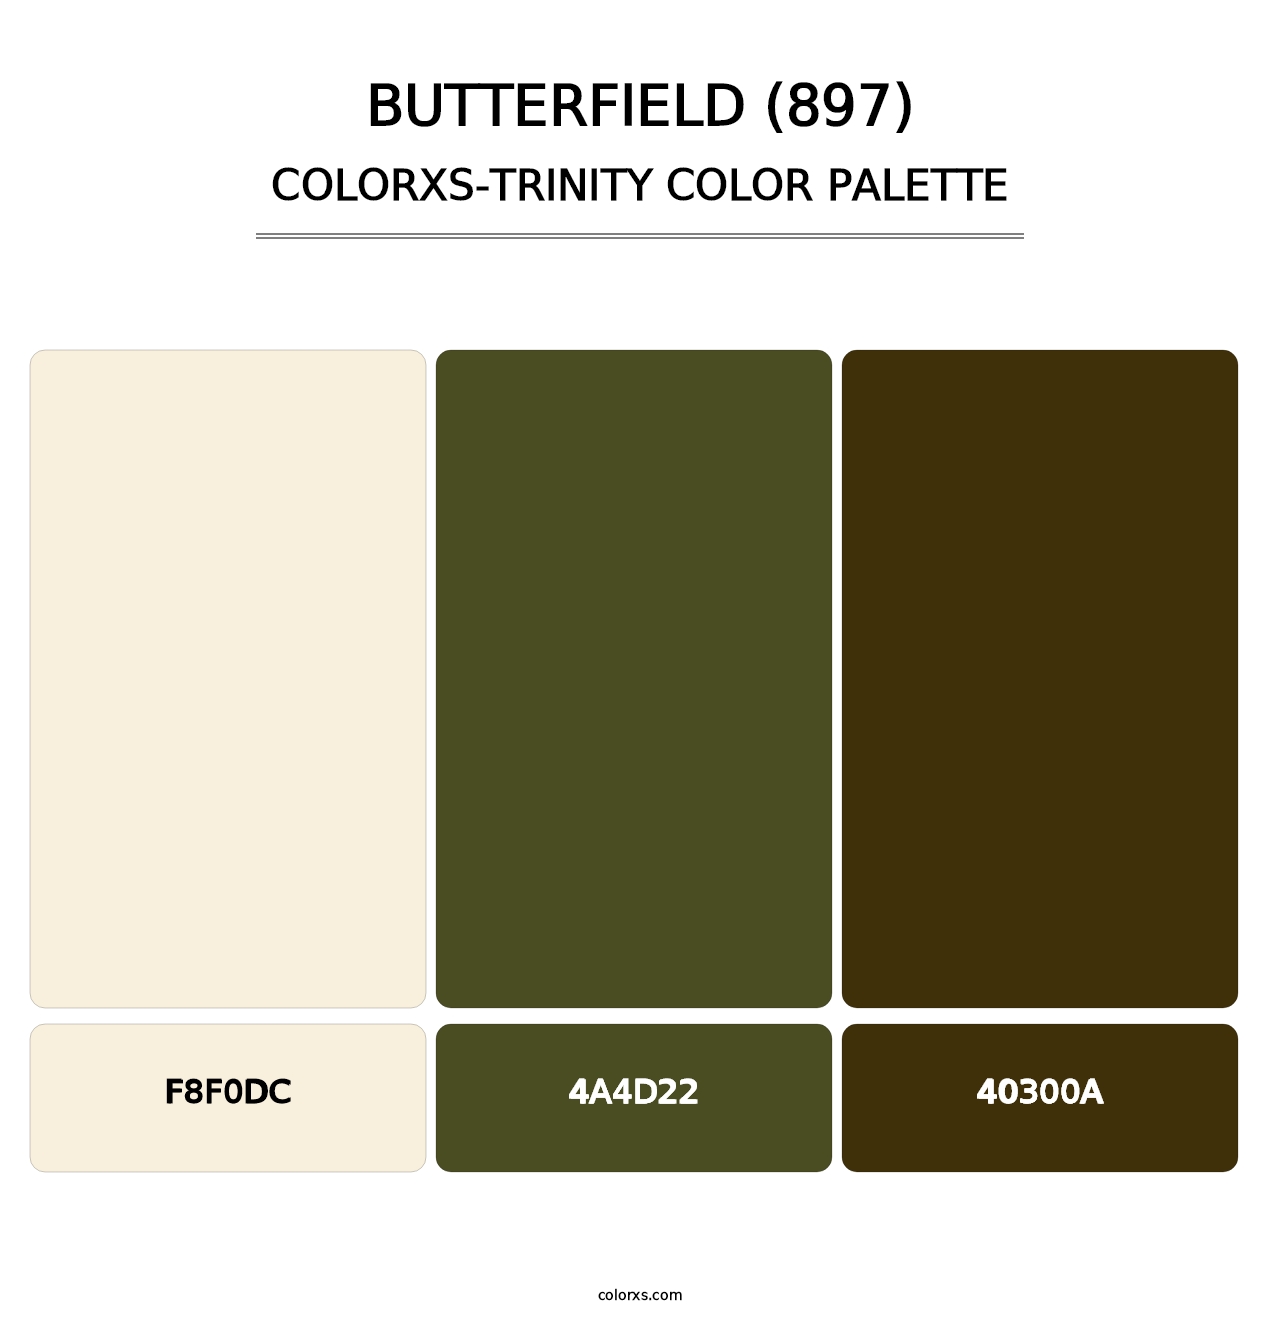 Butterfield (897) - Colorxs Trinity Palette